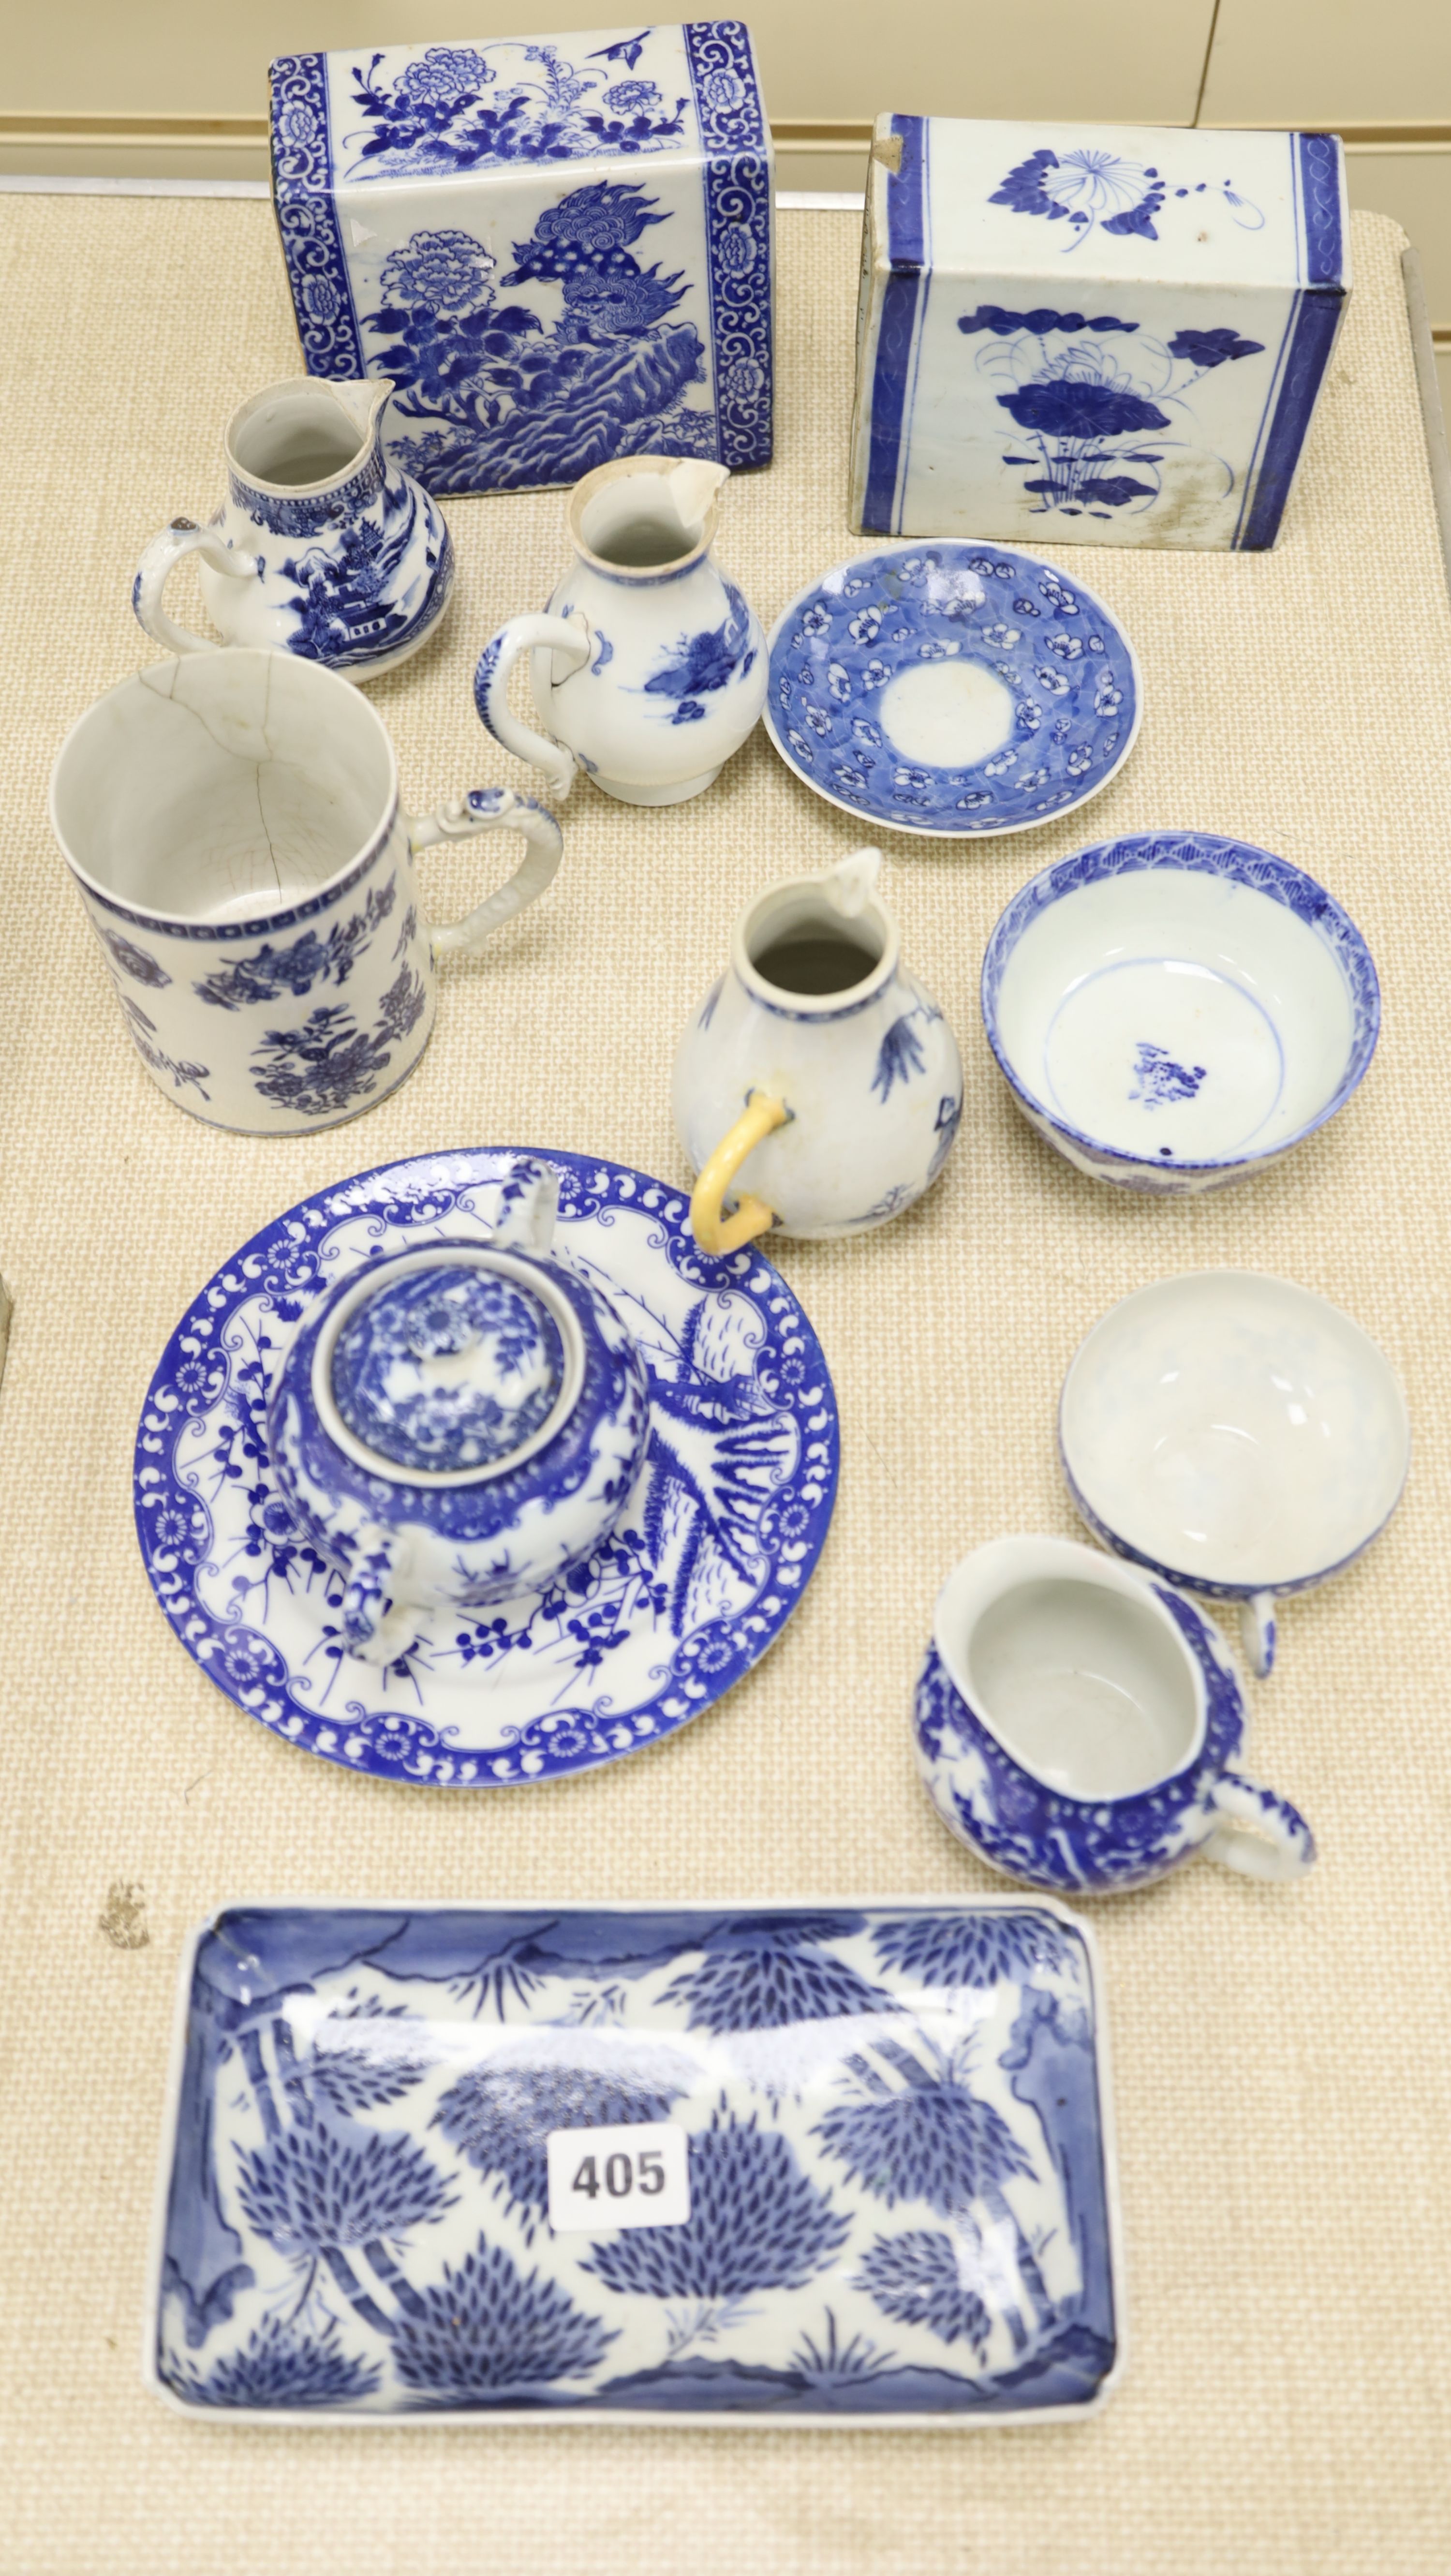 An 18th century Chinese export blue and white mug, 10.5cm, two porcelain pillows and sundry ceramics (a.f.)